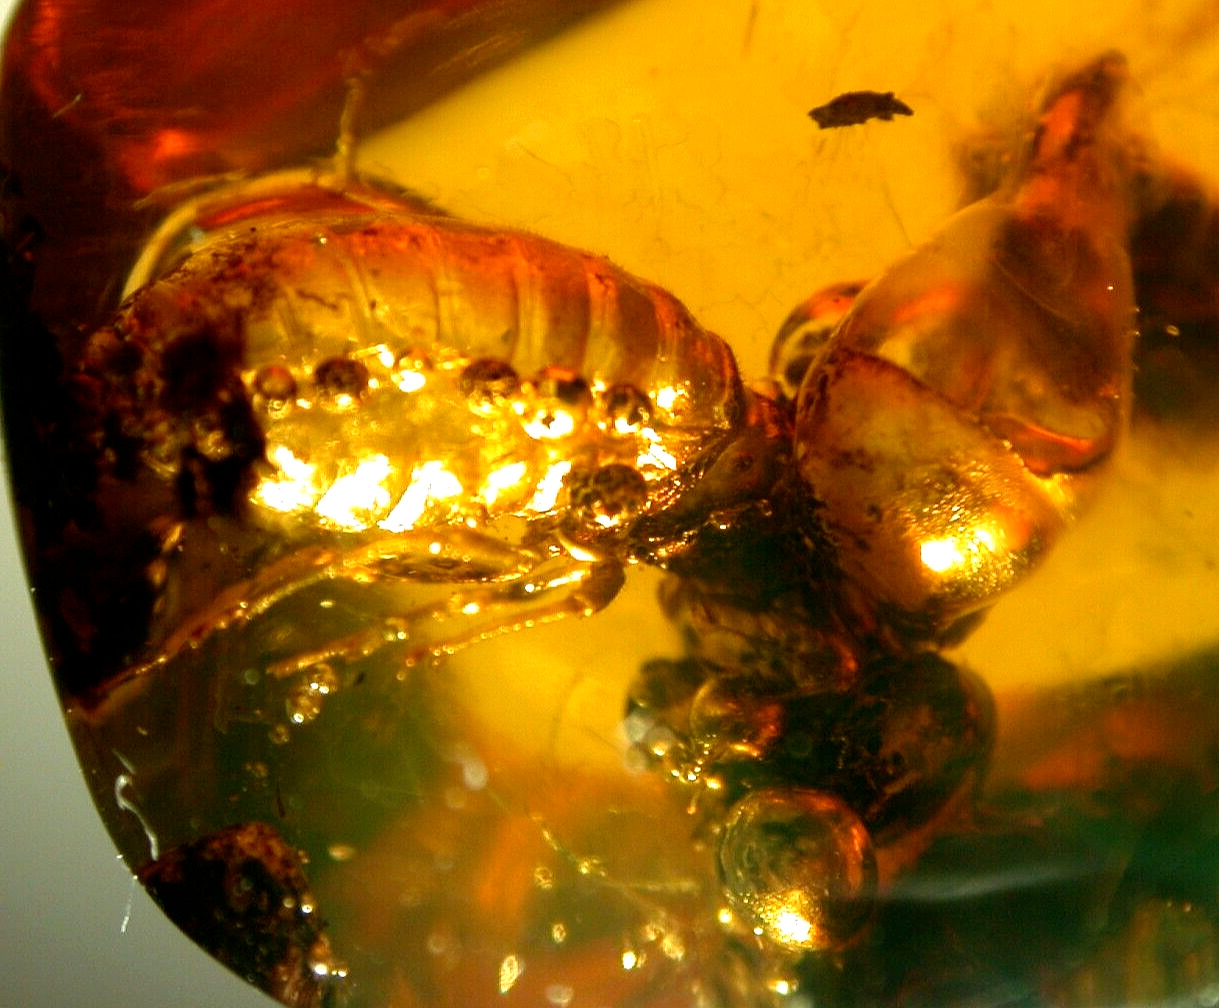 Large Methane Termite with Ancient Methane Bubbles in Dominican Amber Fossil